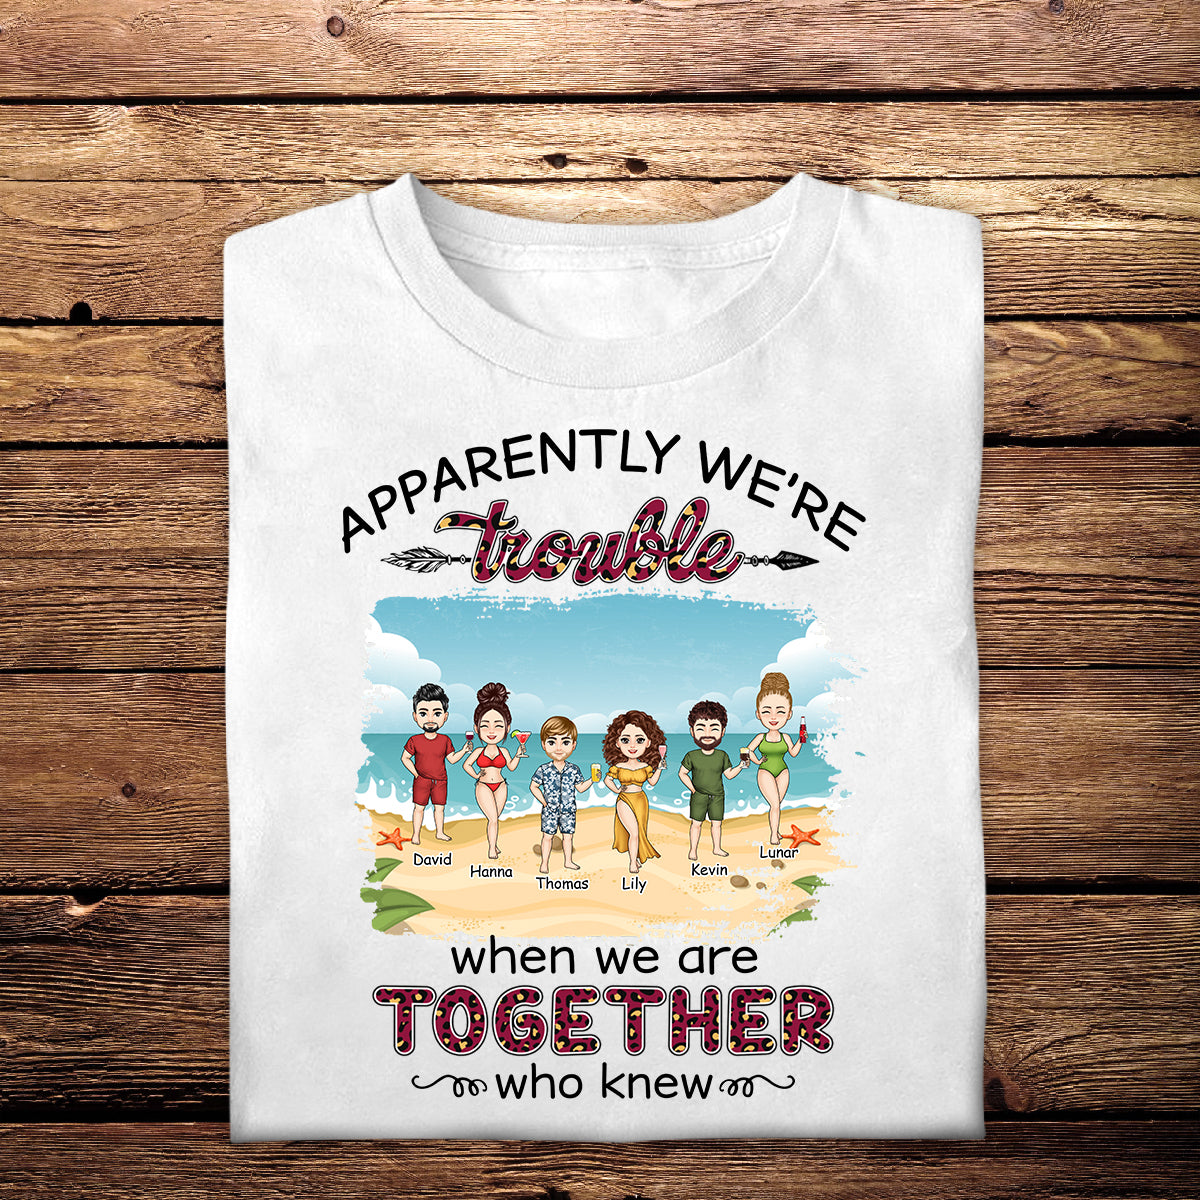 Apparently We're Trouble When We Are Together - Personalized Apparel - Summer Vacation, Beach Vacation